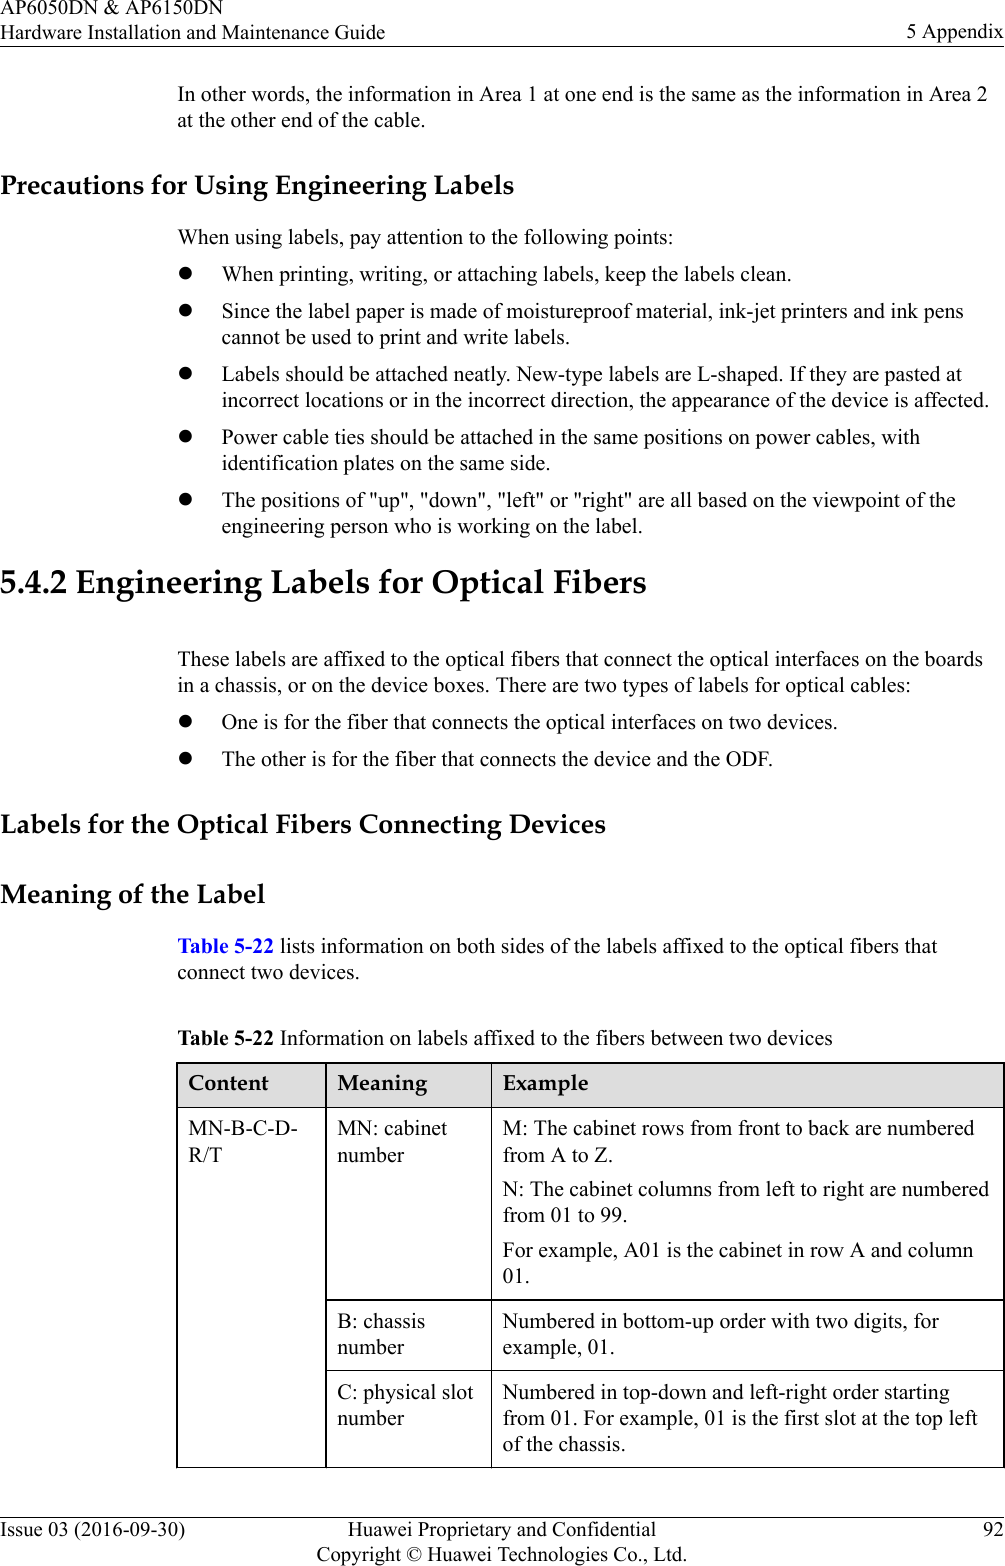 In other words, the information in Area 1 at one end is the same as the information in Area 2at the other end of the cable.Precautions for Using Engineering LabelsWhen using labels, pay attention to the following points:lWhen printing, writing, or attaching labels, keep the labels clean.lSince the label paper is made of moistureproof material, ink-jet printers and ink penscannot be used to print and write labels.lLabels should be attached neatly. New-type labels are L-shaped. If they are pasted atincorrect locations or in the incorrect direction, the appearance of the device is affected.lPower cable ties should be attached in the same positions on power cables, withidentification plates on the same side.lThe positions of &quot;up&quot;, &quot;down&quot;, &quot;left&quot; or &quot;right&quot; are all based on the viewpoint of theengineering person who is working on the label.5.4.2 Engineering Labels for Optical FibersThese labels are affixed to the optical fibers that connect the optical interfaces on the boardsin a chassis, or on the device boxes. There are two types of labels for optical cables:lOne is for the fiber that connects the optical interfaces on two devices.lThe other is for the fiber that connects the device and the ODF.Labels for the Optical Fibers Connecting DevicesMeaning of the LabelTable 5-22 lists information on both sides of the labels affixed to the optical fibers thatconnect two devices.Table 5-22 Information on labels affixed to the fibers between two devicesContent Meaning ExampleMN-B-C-D-R/TMN: cabinetnumberM: The cabinet rows from front to back are numberedfrom A to Z.N: The cabinet columns from left to right are numberedfrom 01 to 99.For example, A01 is the cabinet in row A and column01.B: chassisnumberNumbered in bottom-up order with two digits, forexample, 01.C: physical slotnumberNumbered in top-down and left-right order startingfrom 01. For example, 01 is the first slot at the top leftof the chassis.AP6050DN &amp; AP6150DNHardware Installation and Maintenance Guide 5 AppendixIssue 03 (2016-09-30) Huawei Proprietary and ConfidentialCopyright © Huawei Technologies Co., Ltd.92